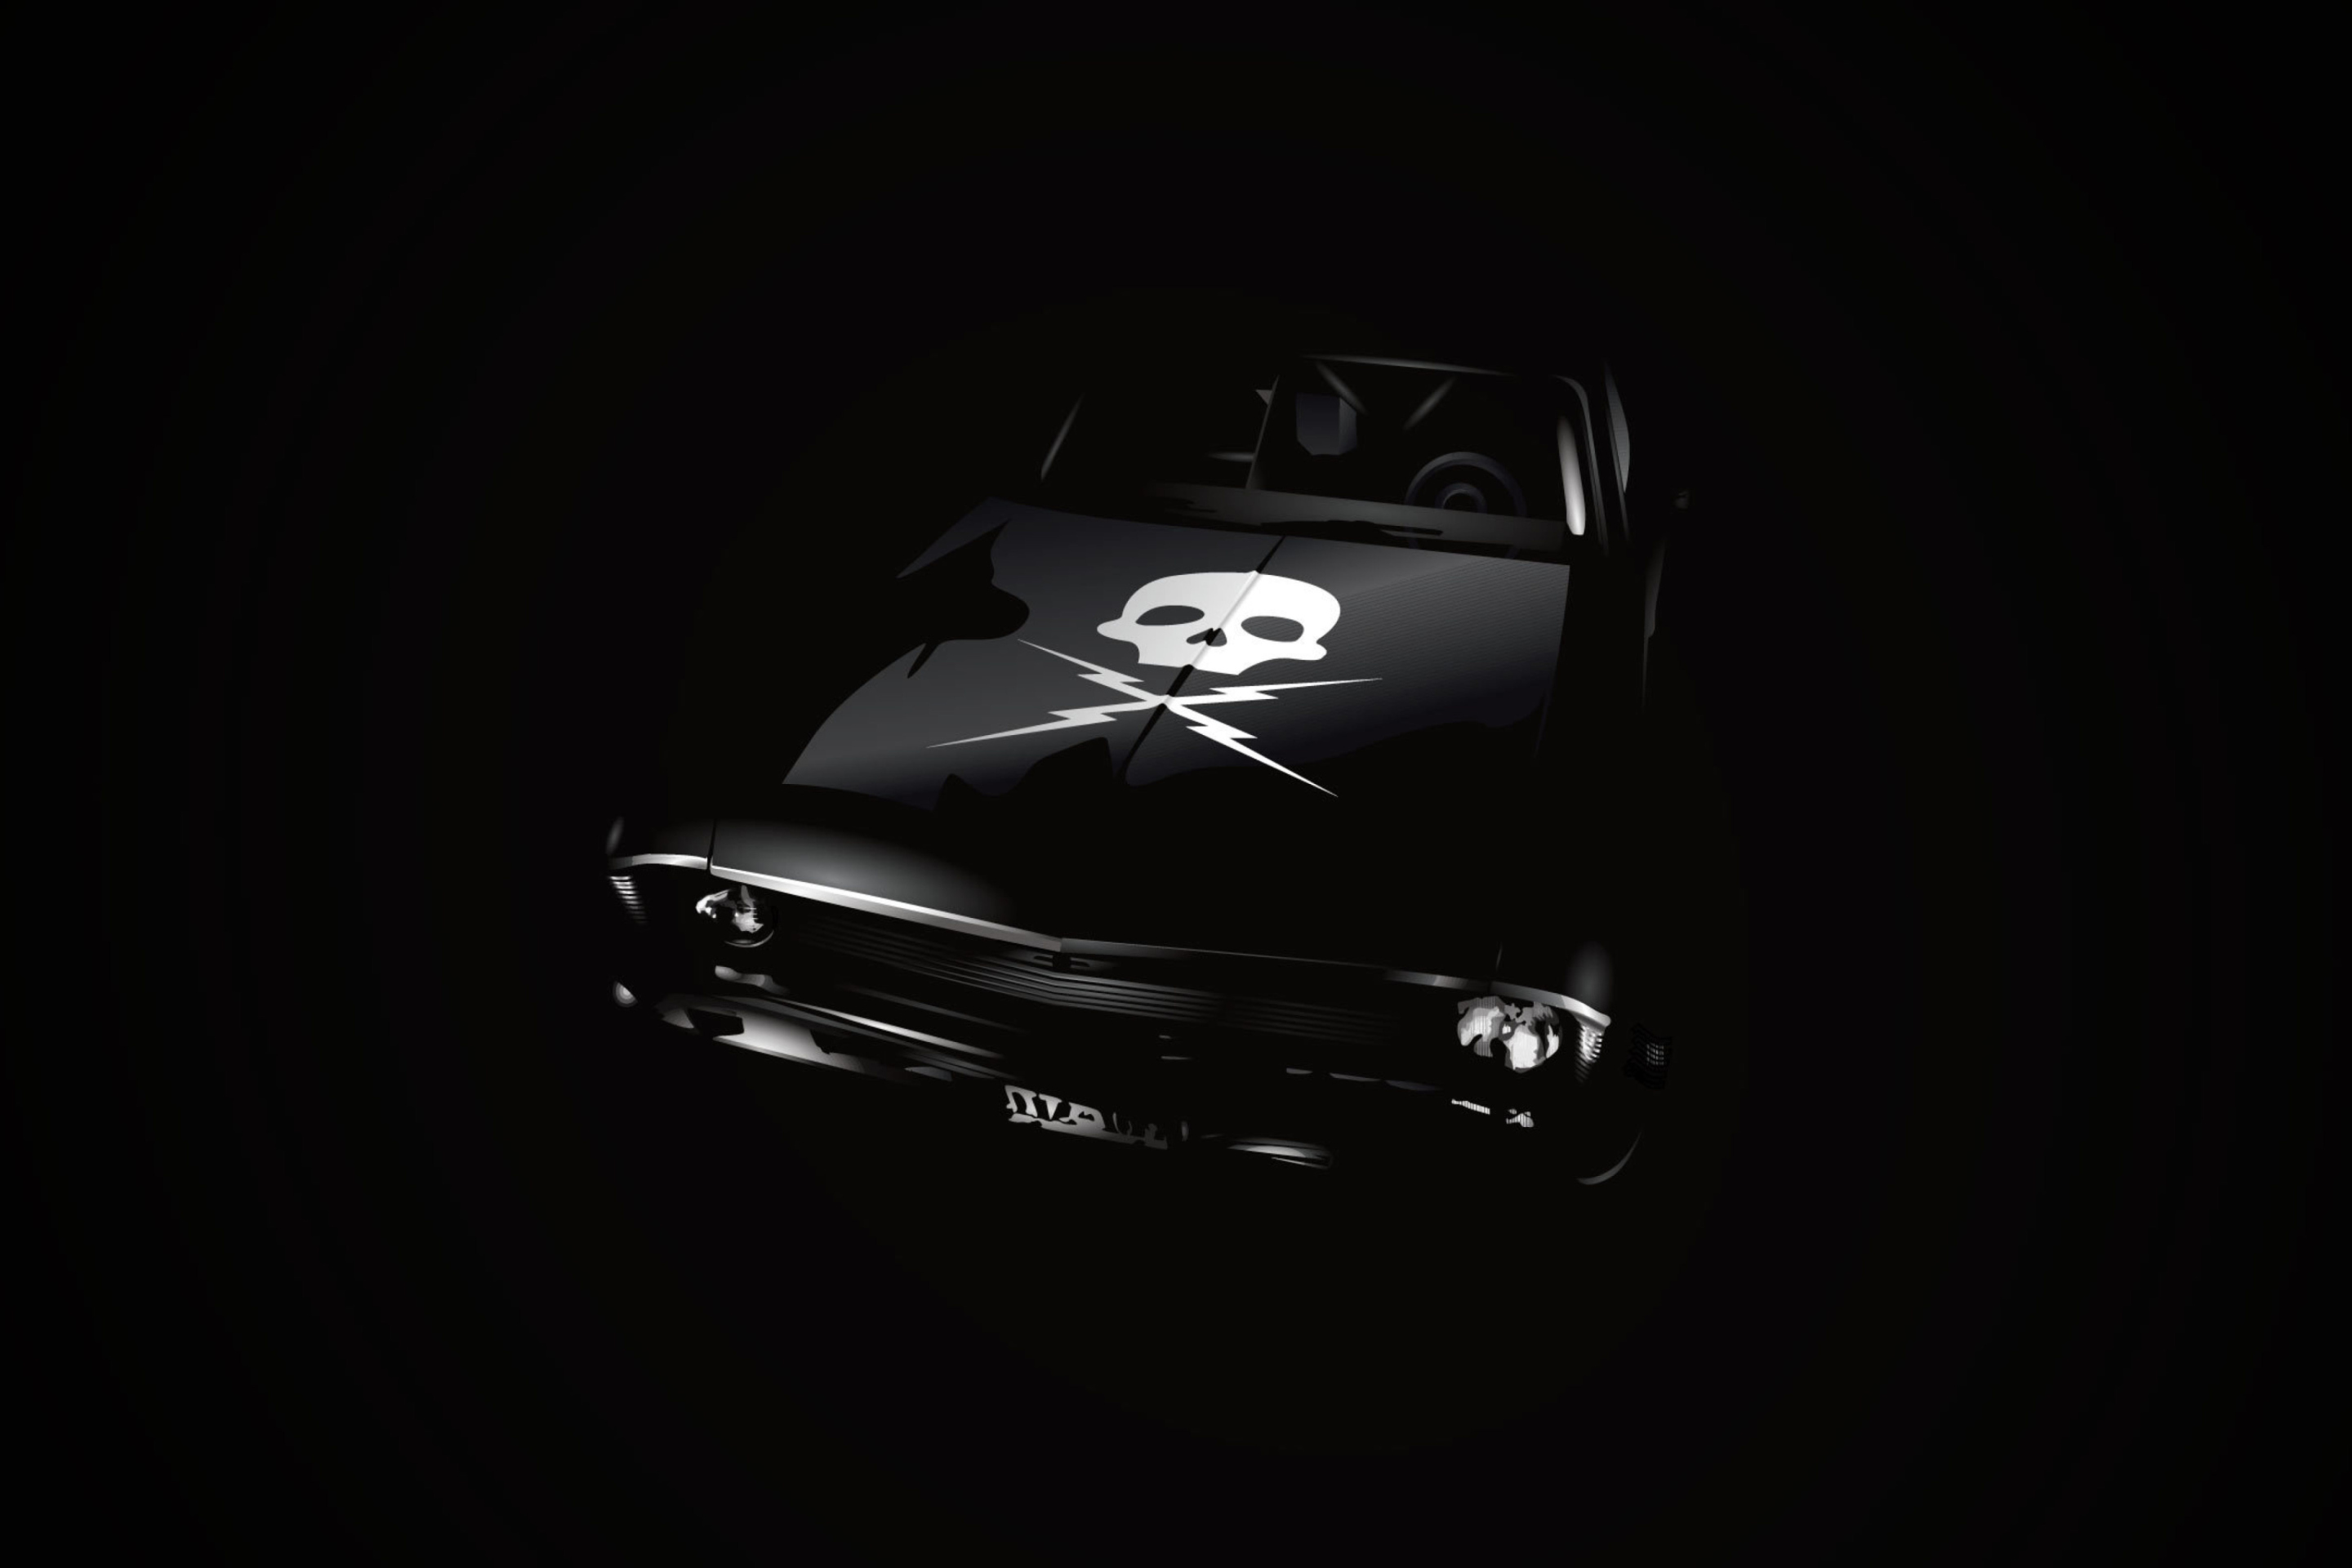 Chevrolet Death Proof Wallpaper For Samsung Galaxy S6